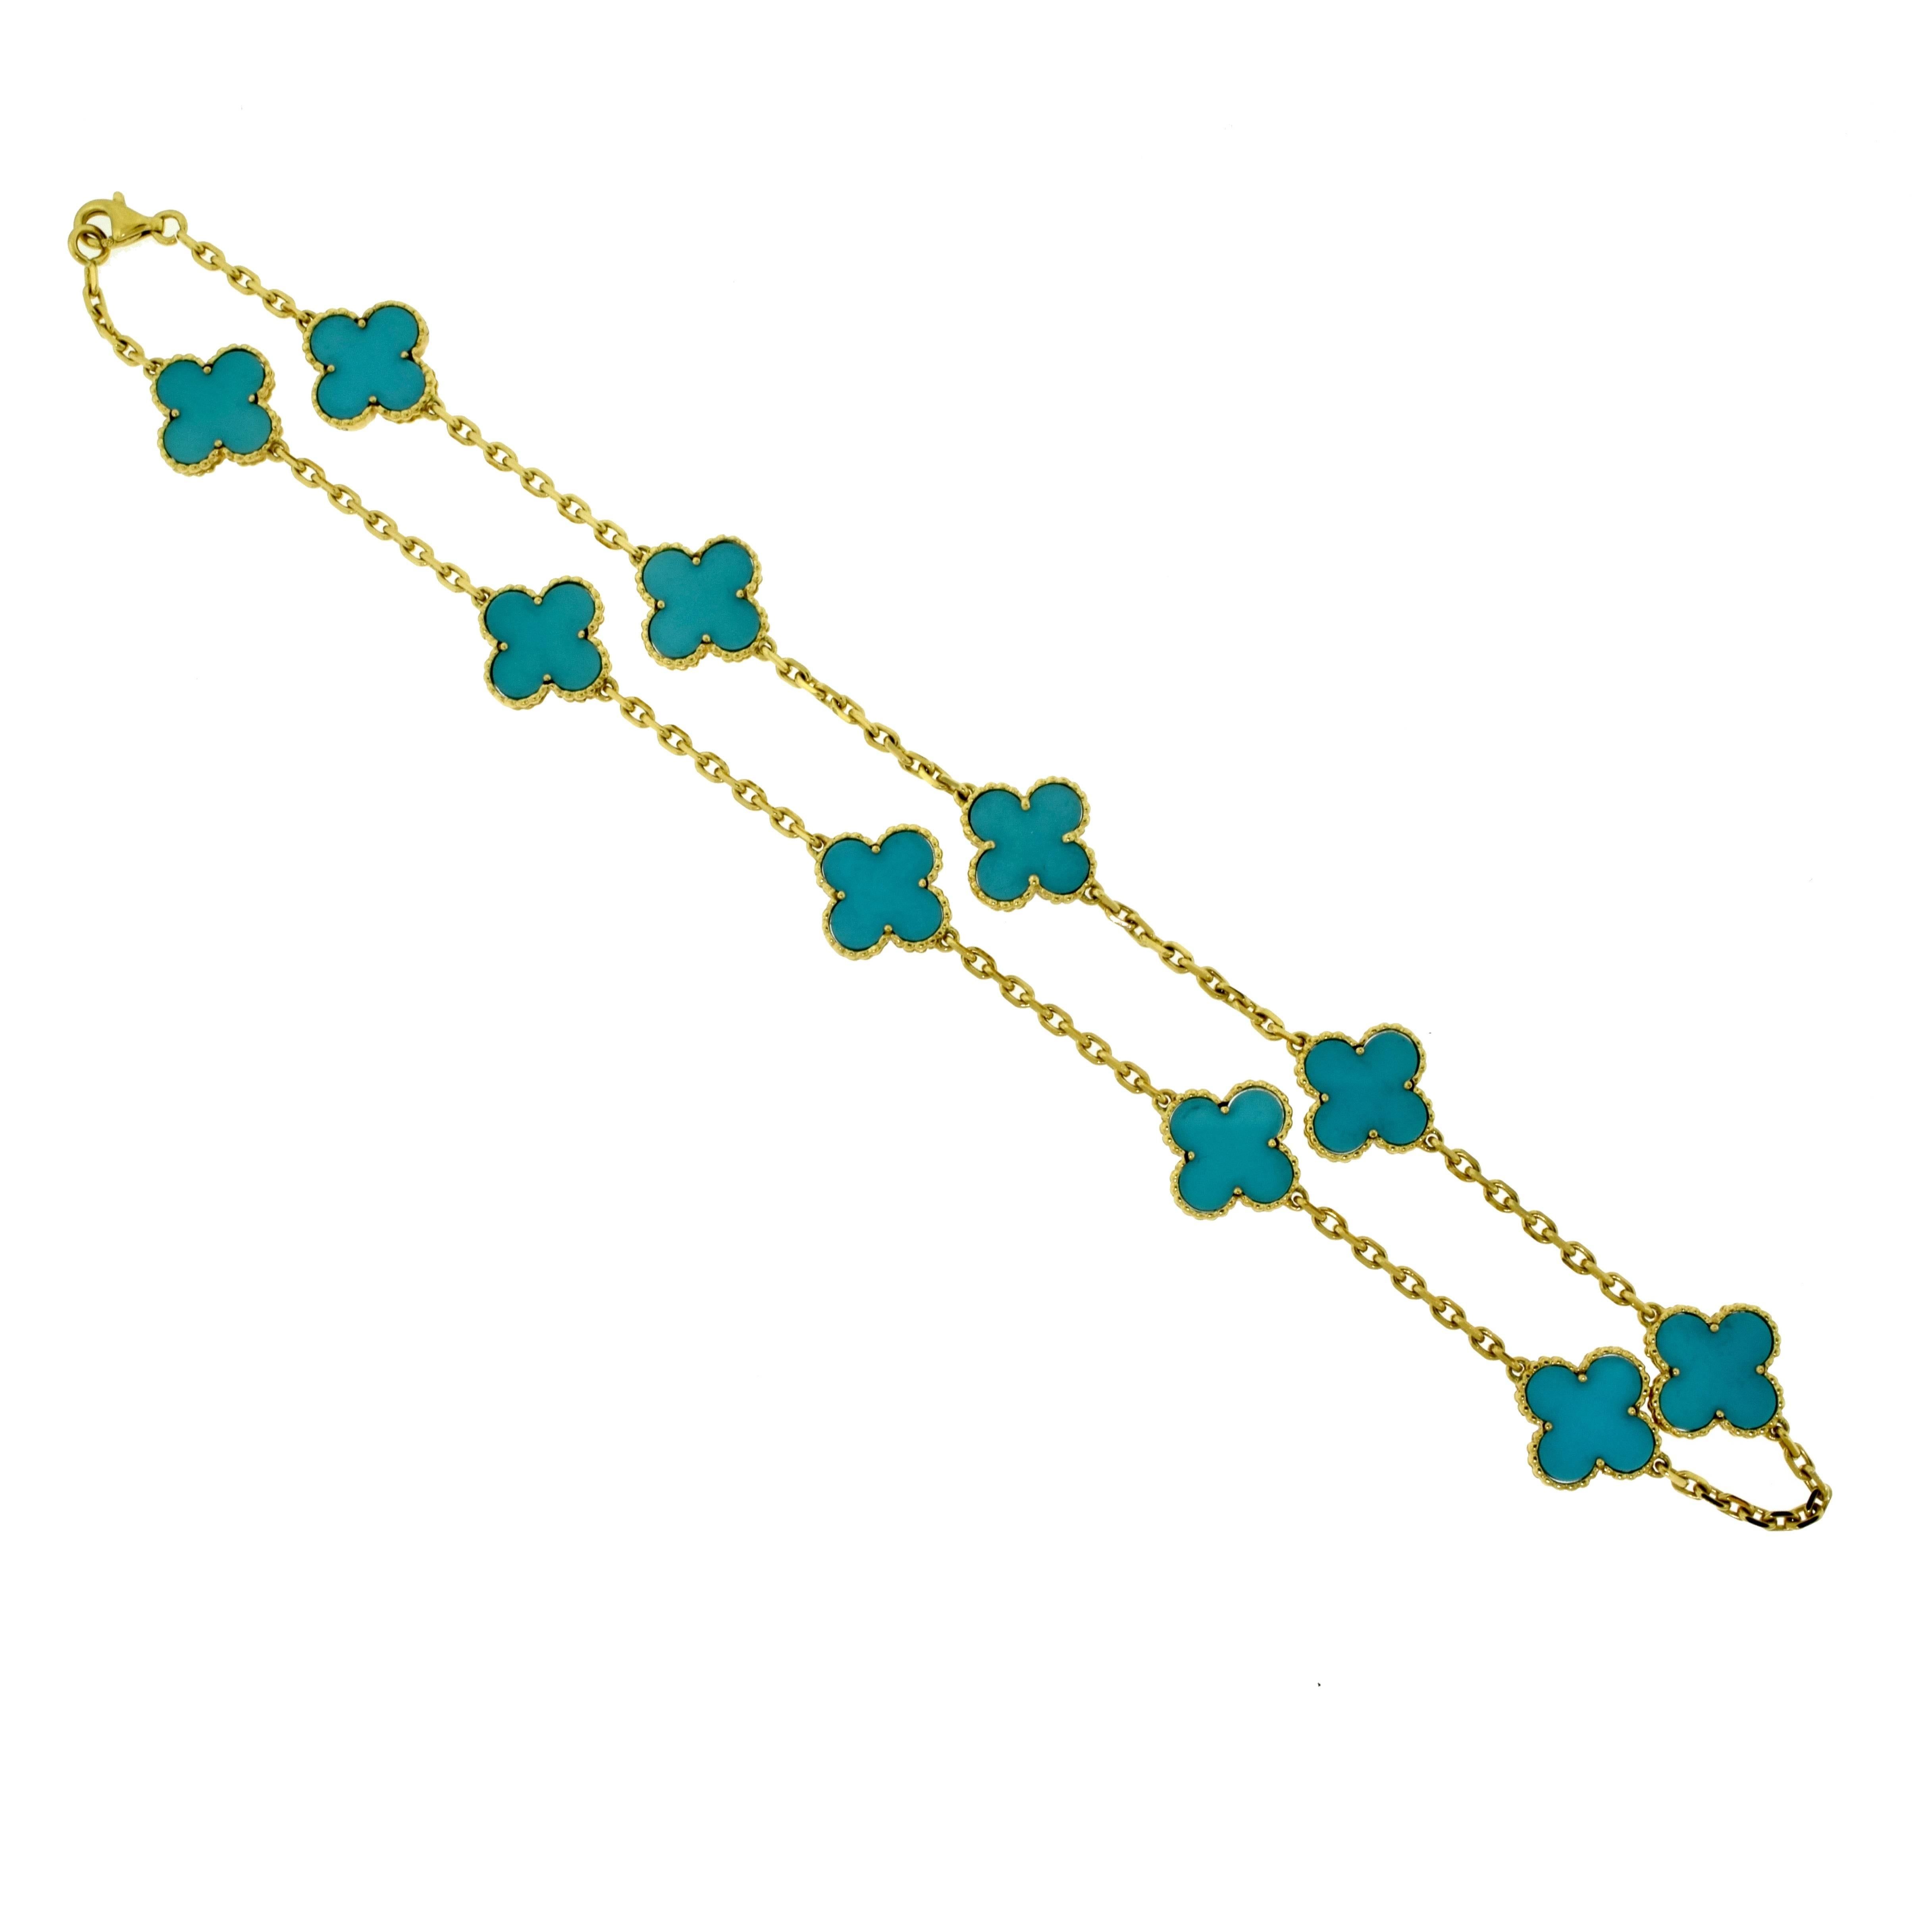 From Van Cleef & Arpel's Vintage Alhambra Collection:

Metal: 18 Karat Yellow Gold
Stones: 10 Turquoise Stones
Total Item Weight (g): 21.1
Necklace Length: 16.5 inches
Motif Dimension: approx. 14.28 mm
Hallmark: VCA Au750 Serial Number (blocked for